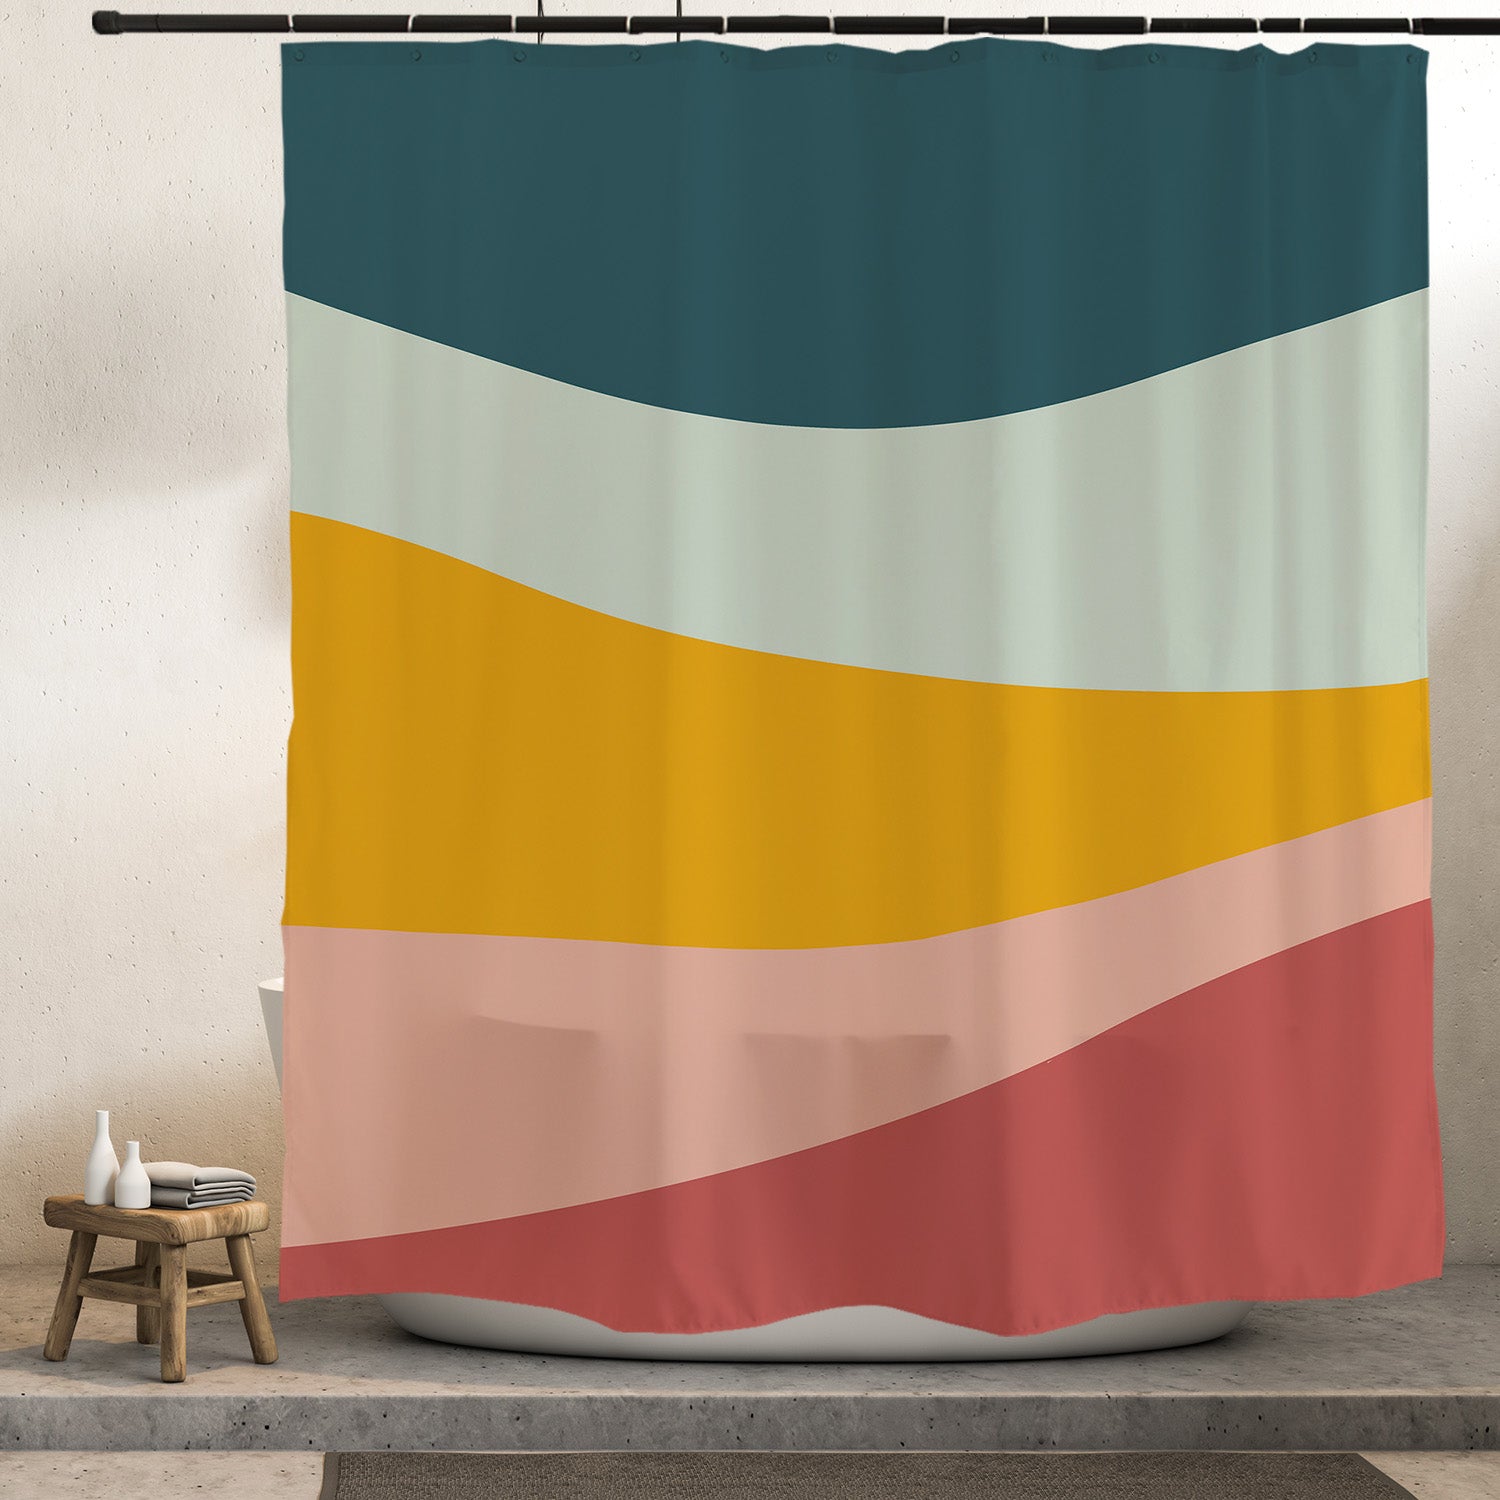 Feblilac Five Color Mountain Shower Curtain with Hooks